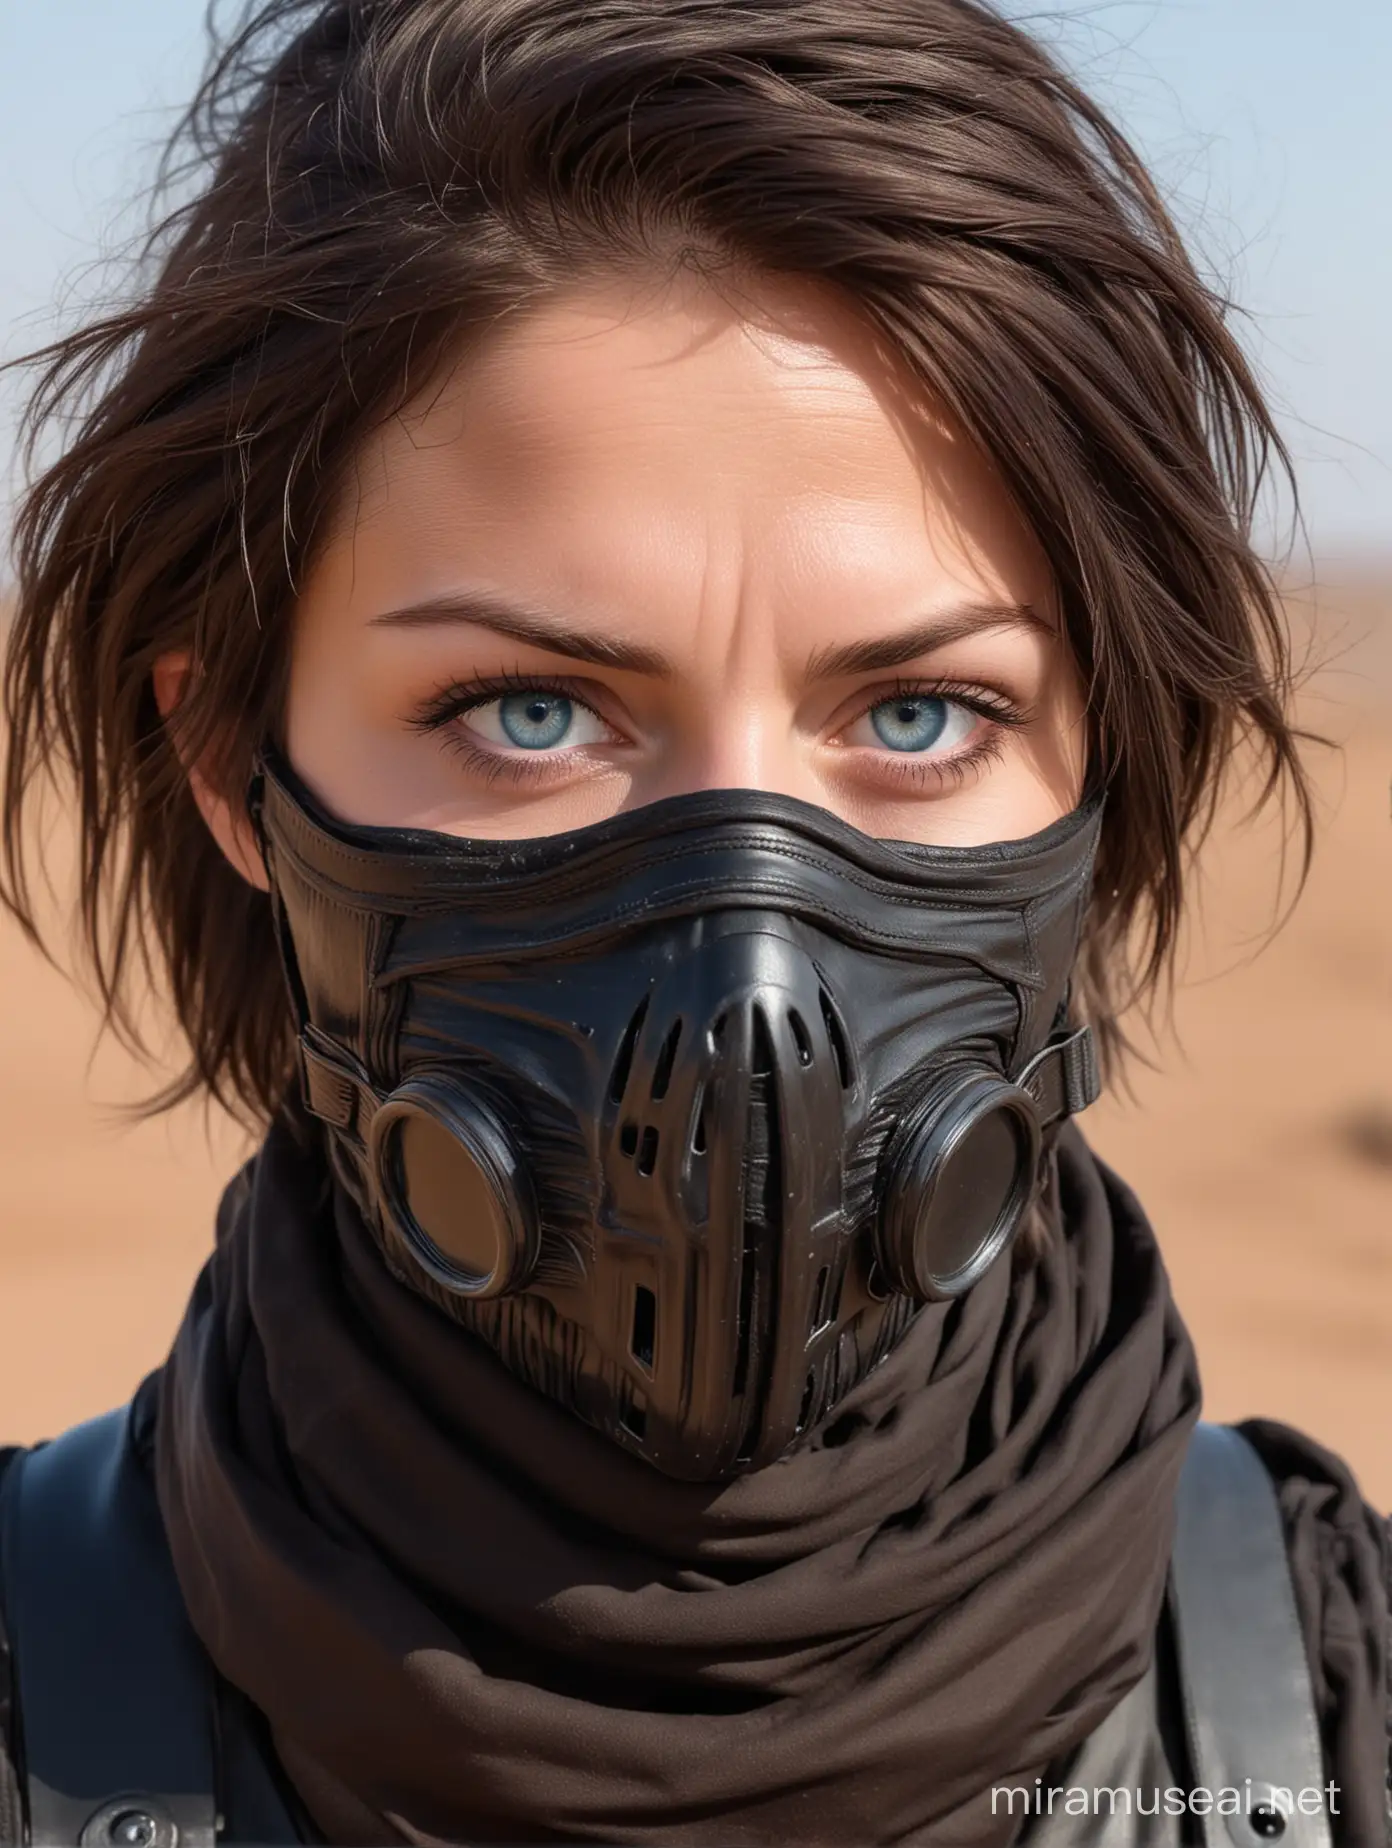  full portrait woman with weather-roughened skin, blue-on-blue eyes (blue sclera), wearing brown leather and a black stillsuit breathing mask covers her lower face. A dust scarf covers her hair. Desert background